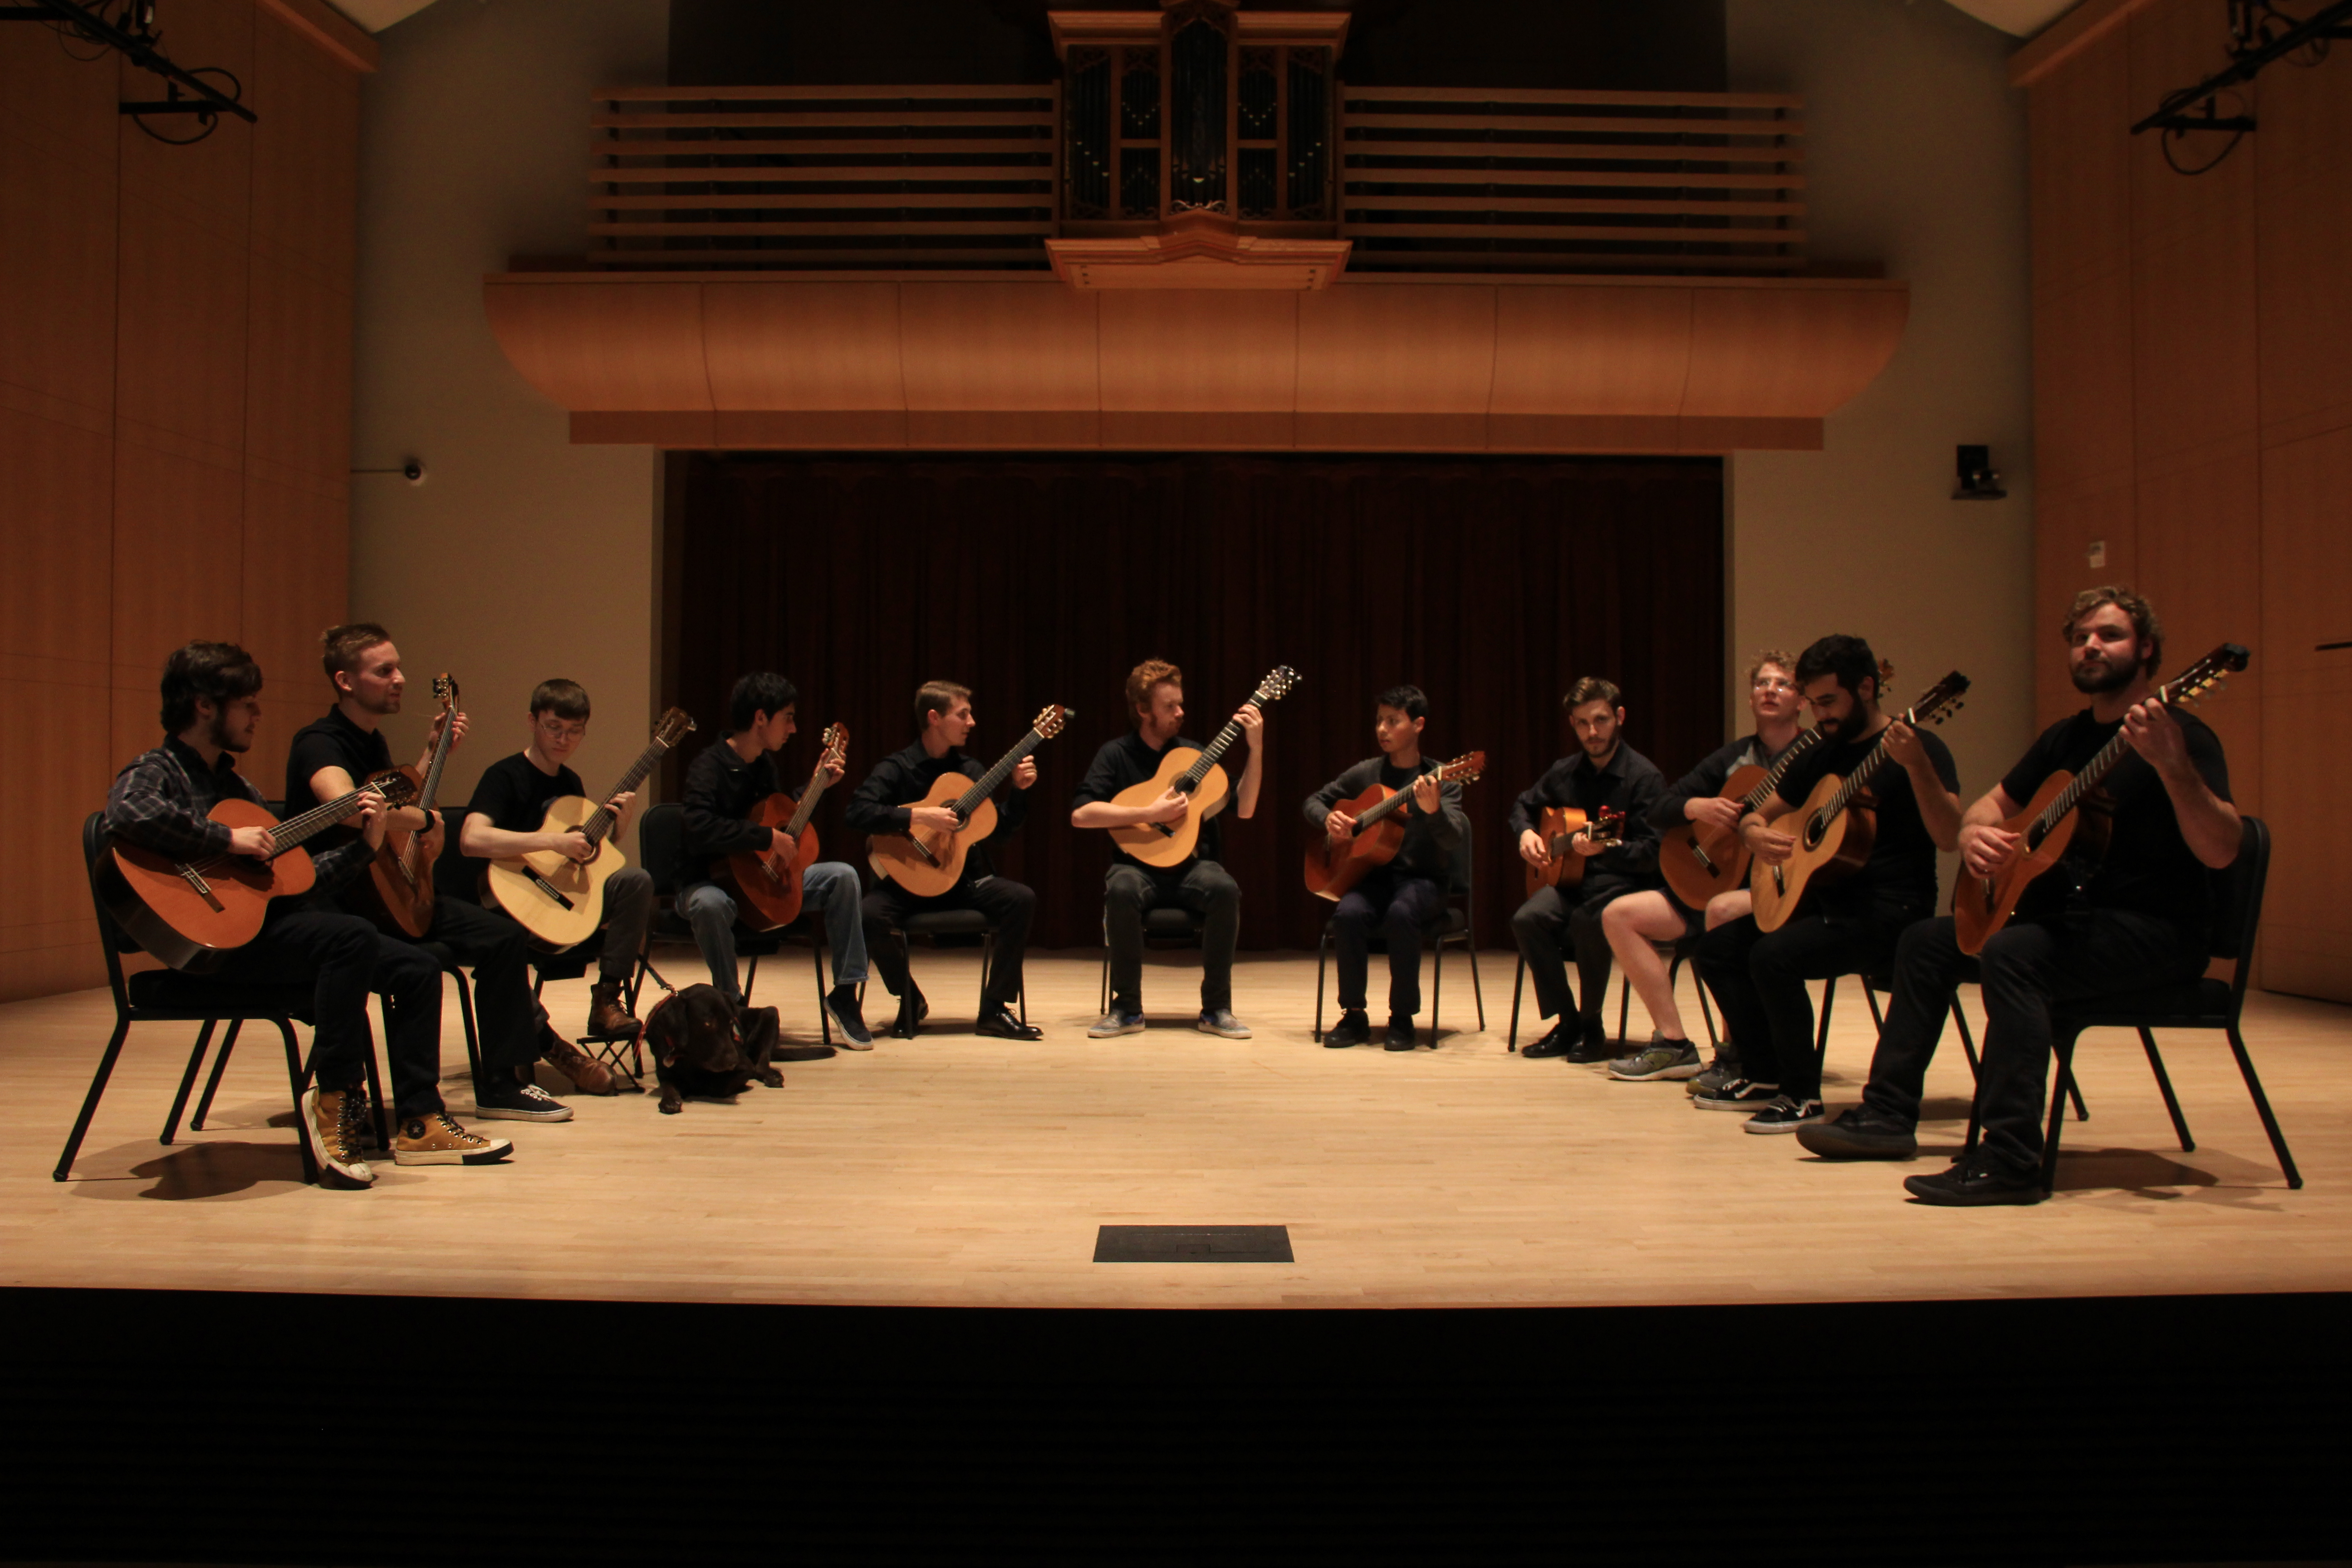 Guitar Ensemble in a half circle holding guitars on stage